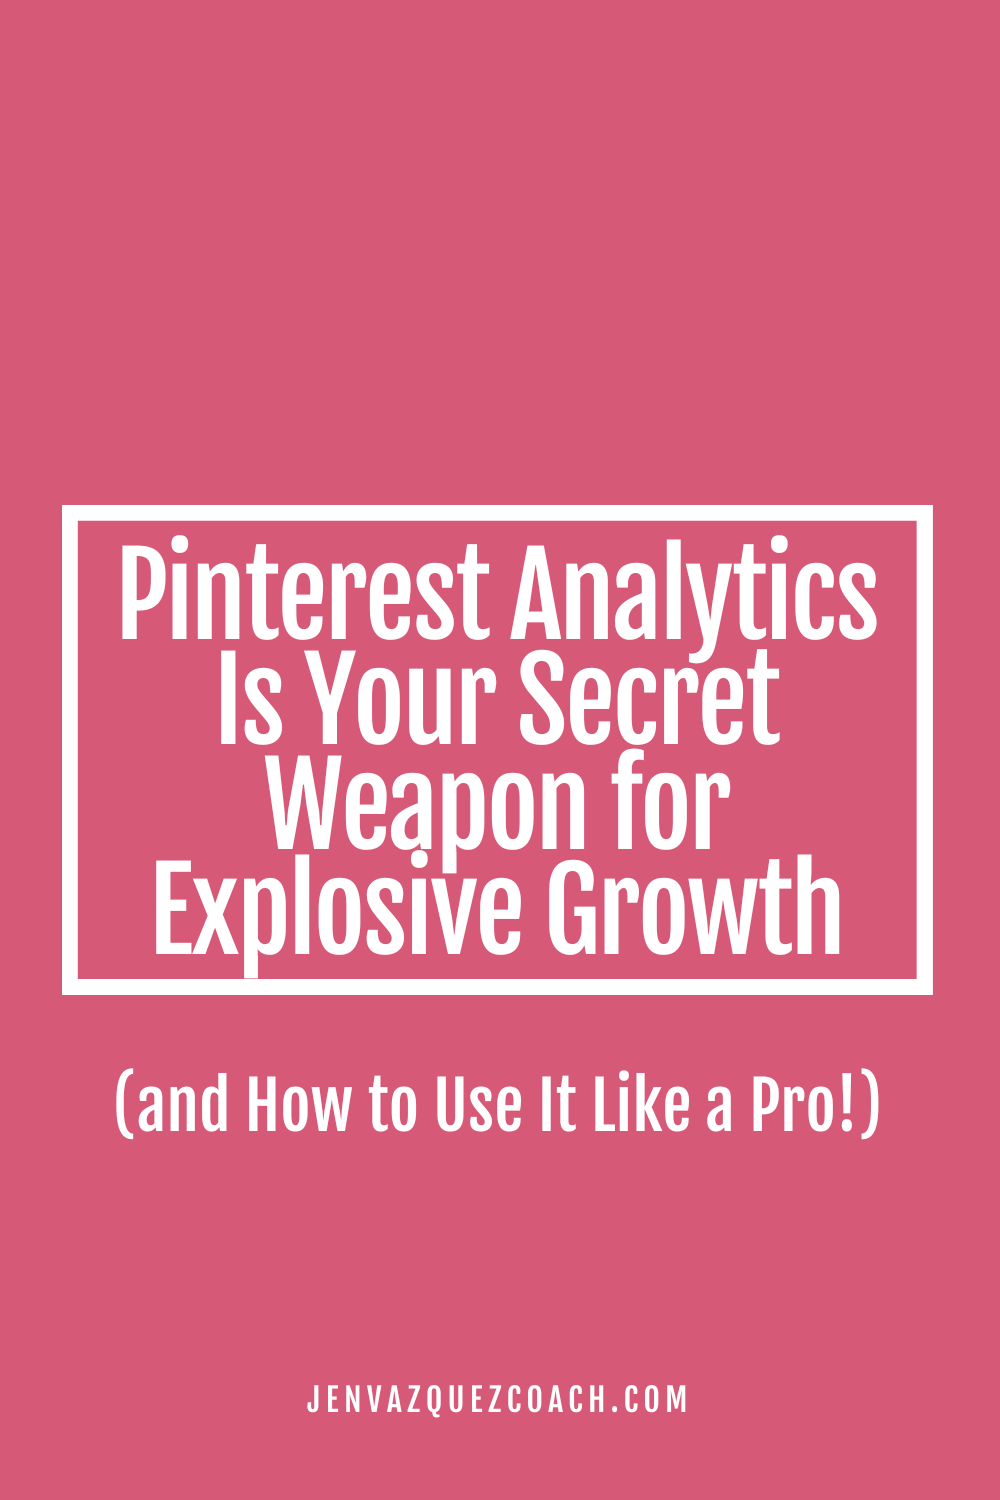 Pink background with white writing saying Pinterest Analytics Is Your Secret Weapon for Explosive Growth